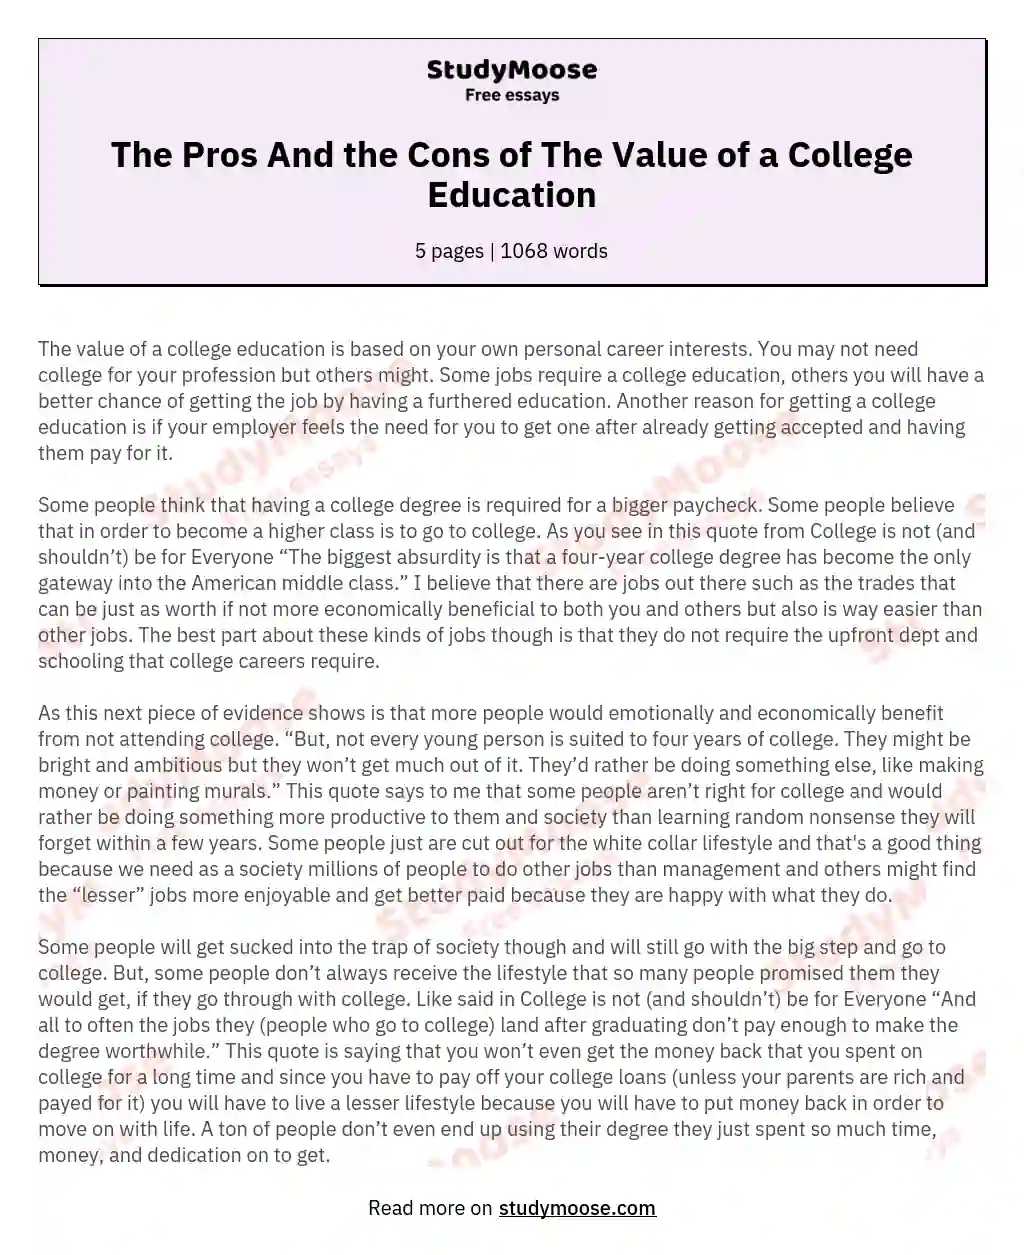 The Pros And the Cons of The Value of a College Education essay